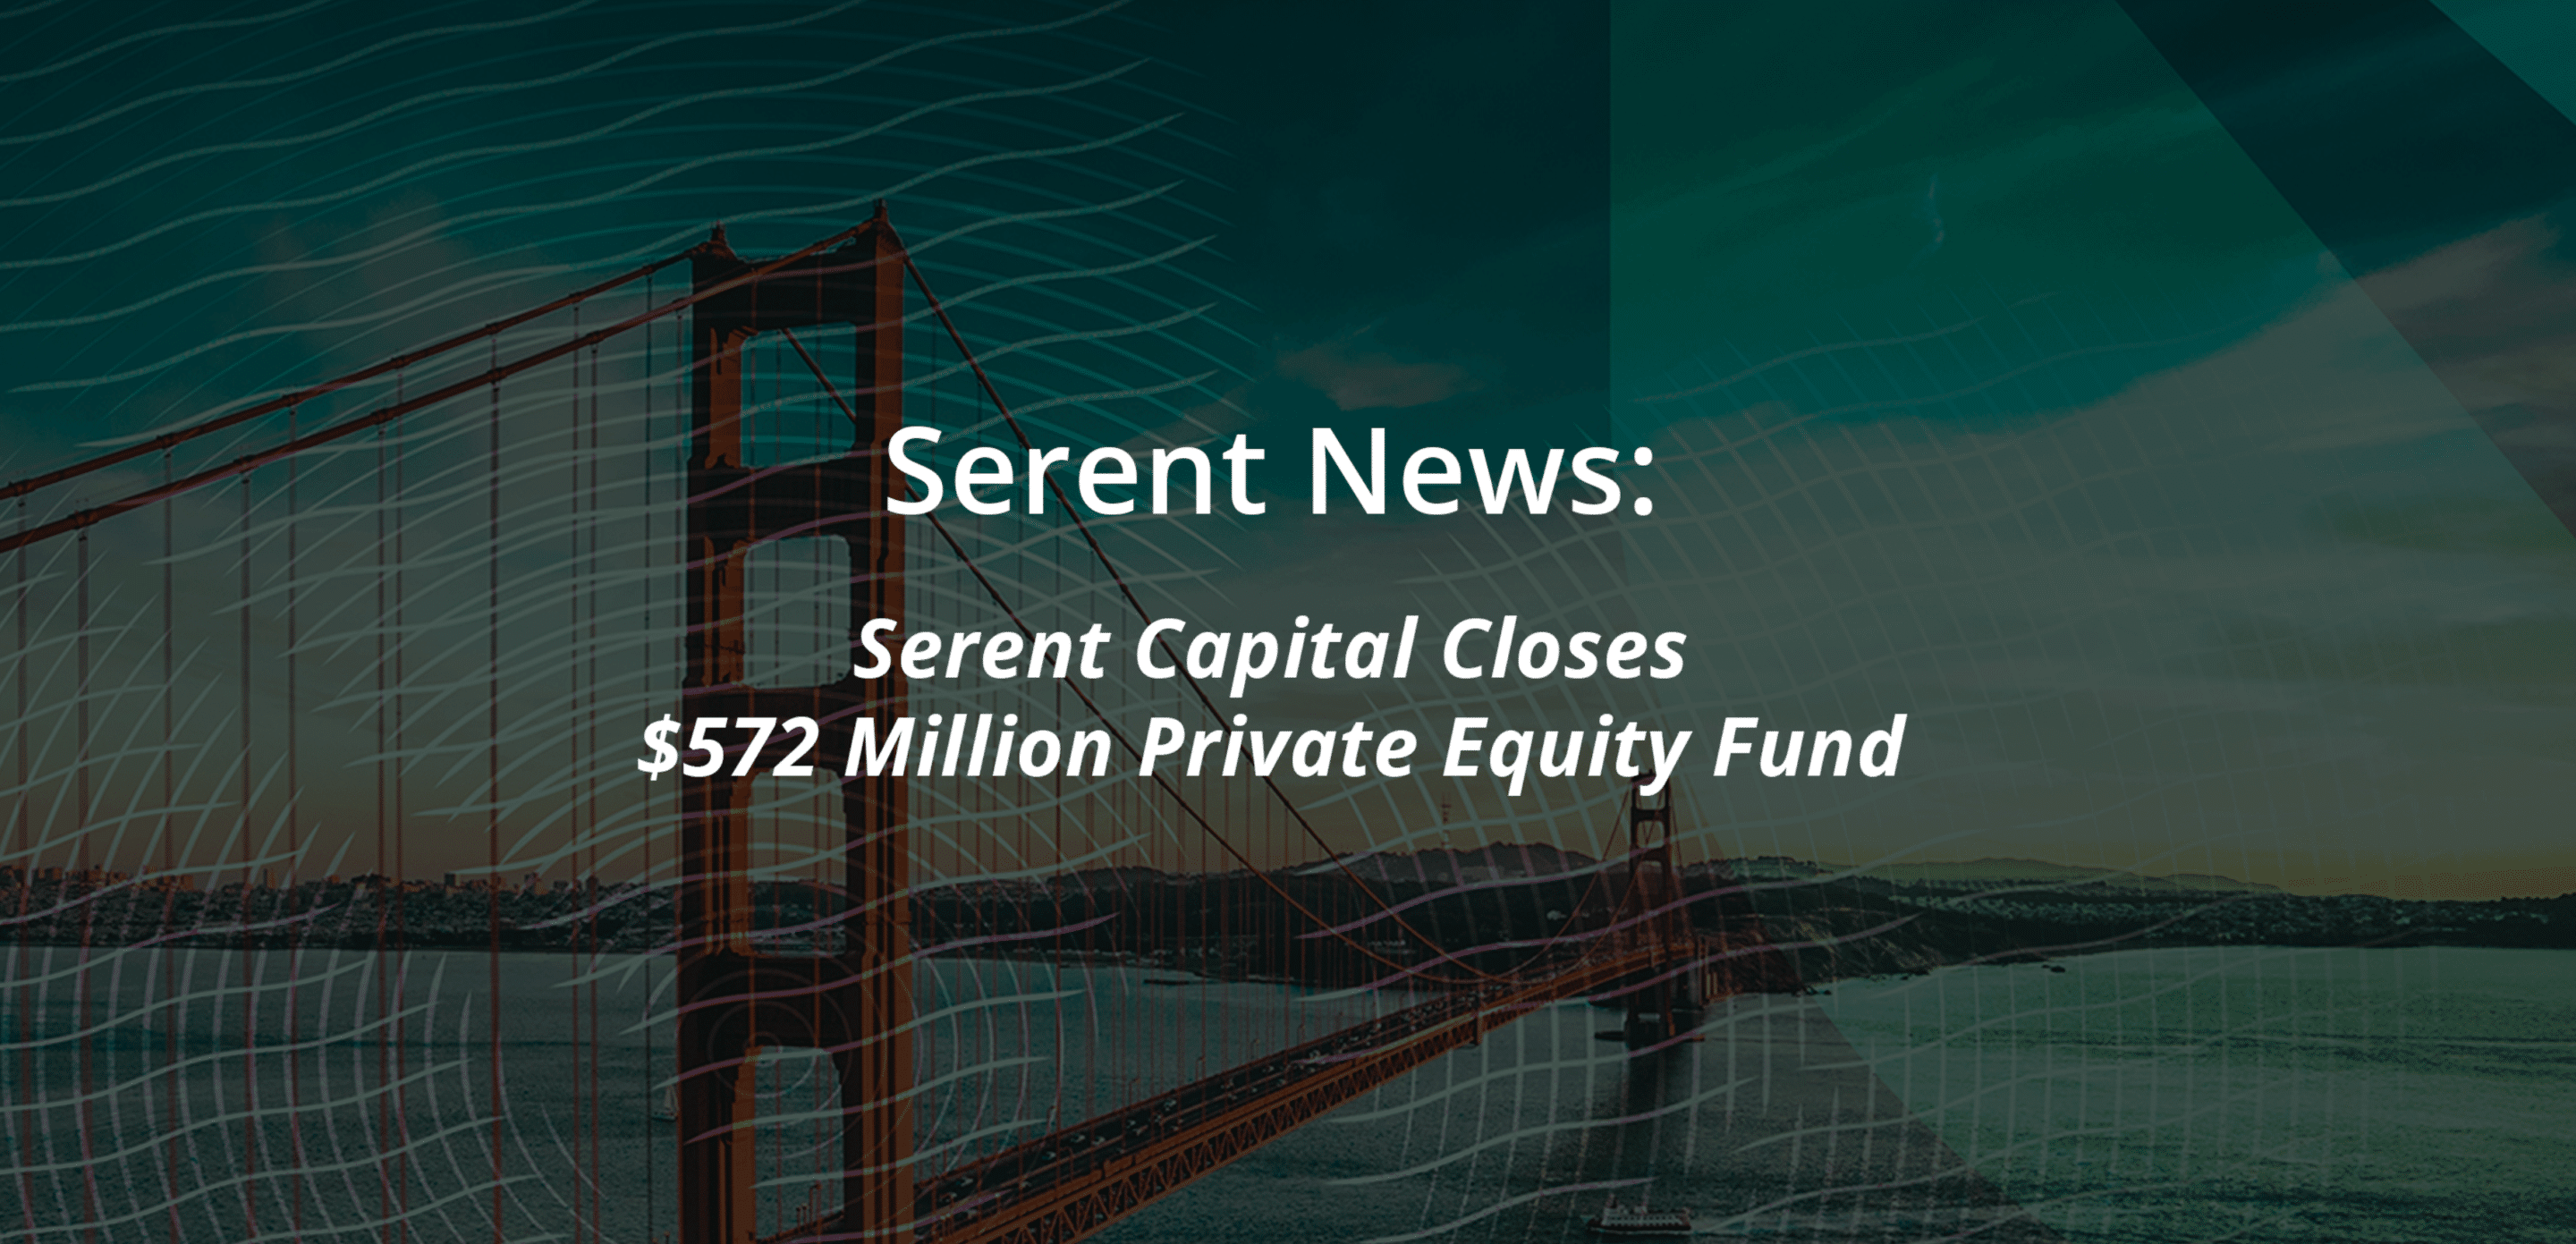 Serent Capital Closes $572 Million Private Equity Fund